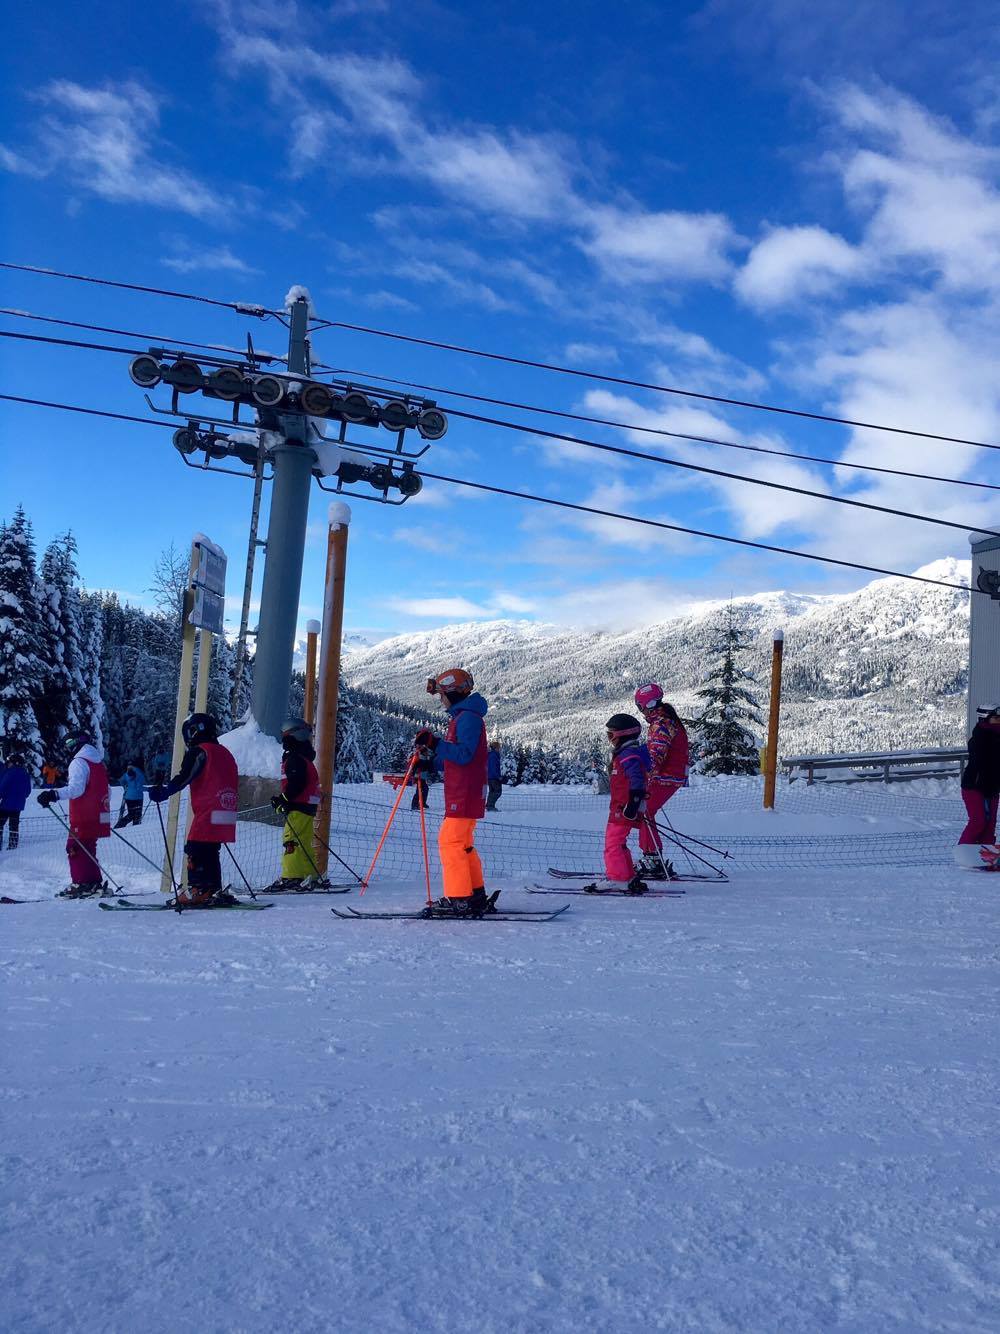  The mountain also runs  ski school  for the kids, which I remember being enrolled in as a child myself. There are lessons by the hour, as well as multi-day camps.&nbsp;A (somewhat fond) memory I have of ski school here was that on the second day of 